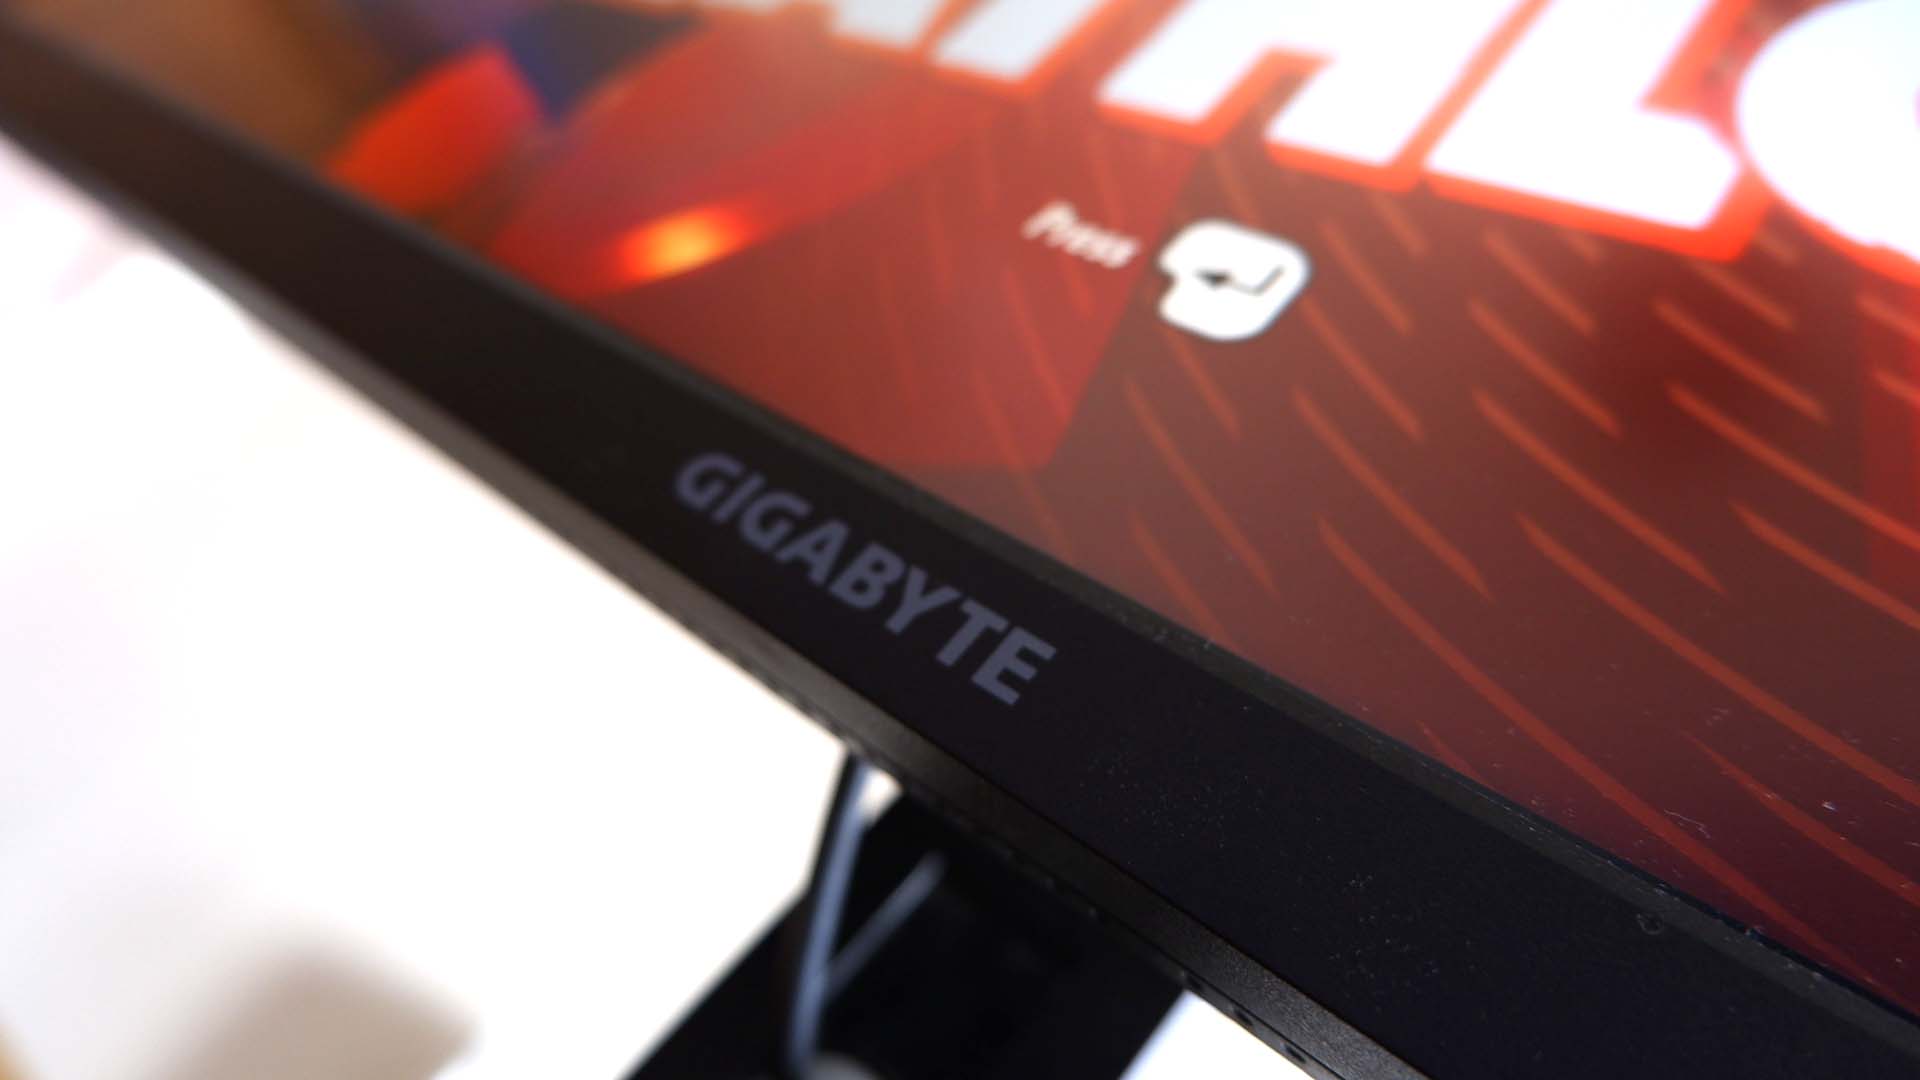 Gigabyte M28U gaming monitor pictured on a desk